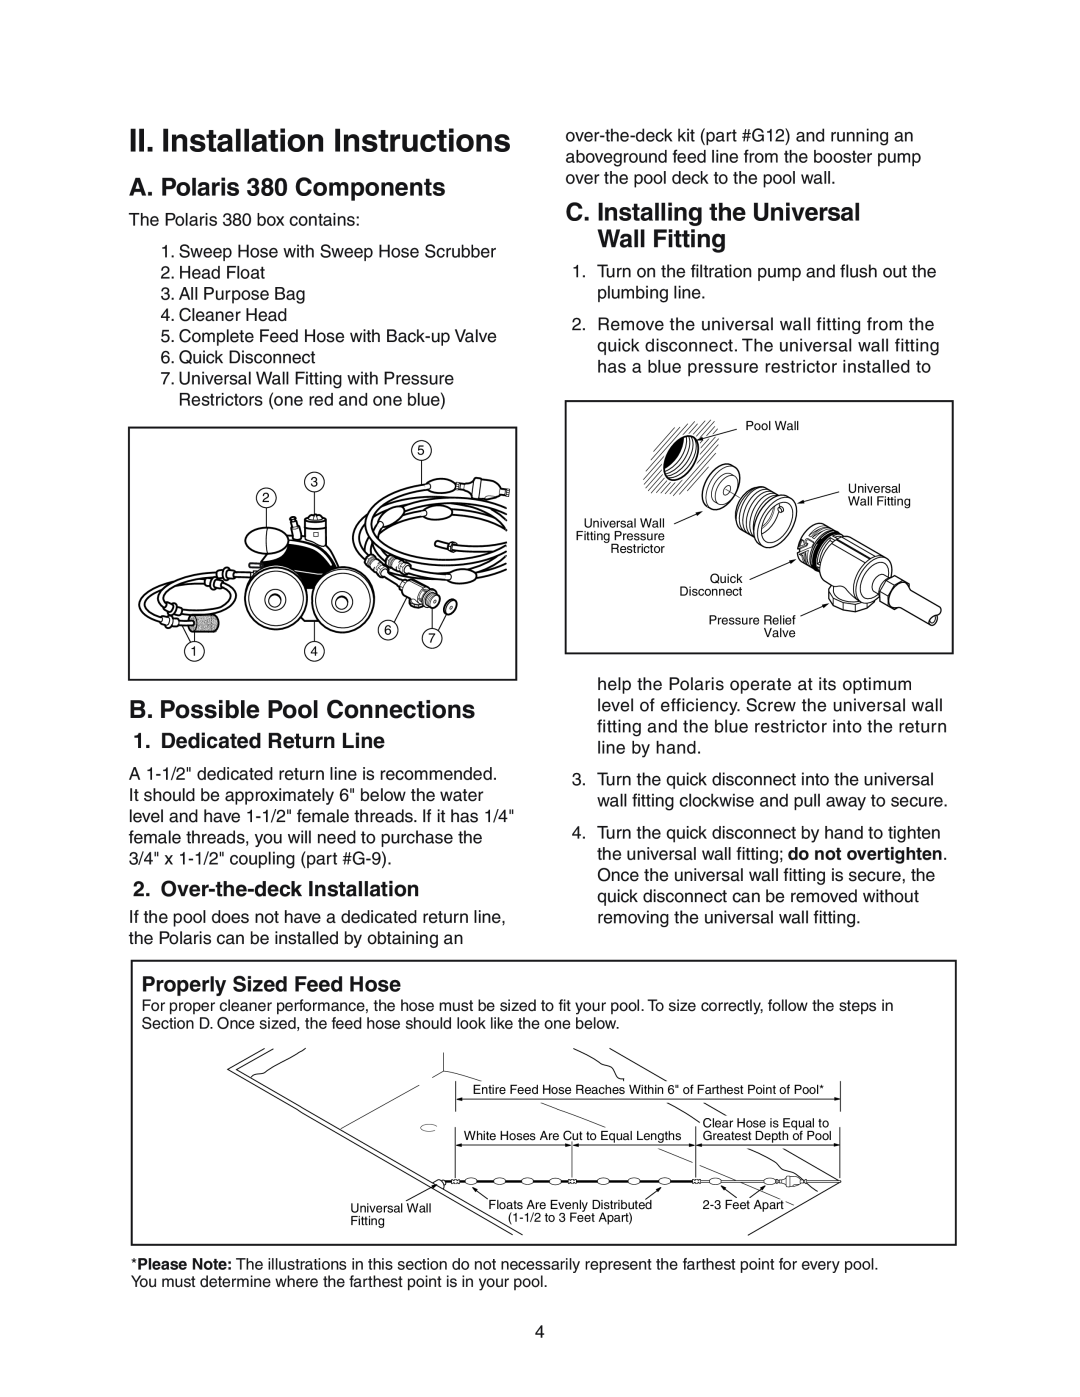 Polaris II. Installation Instructions, A. Polaris 380 Components, B. Possible Pool Connections, Dedicated Return Line 